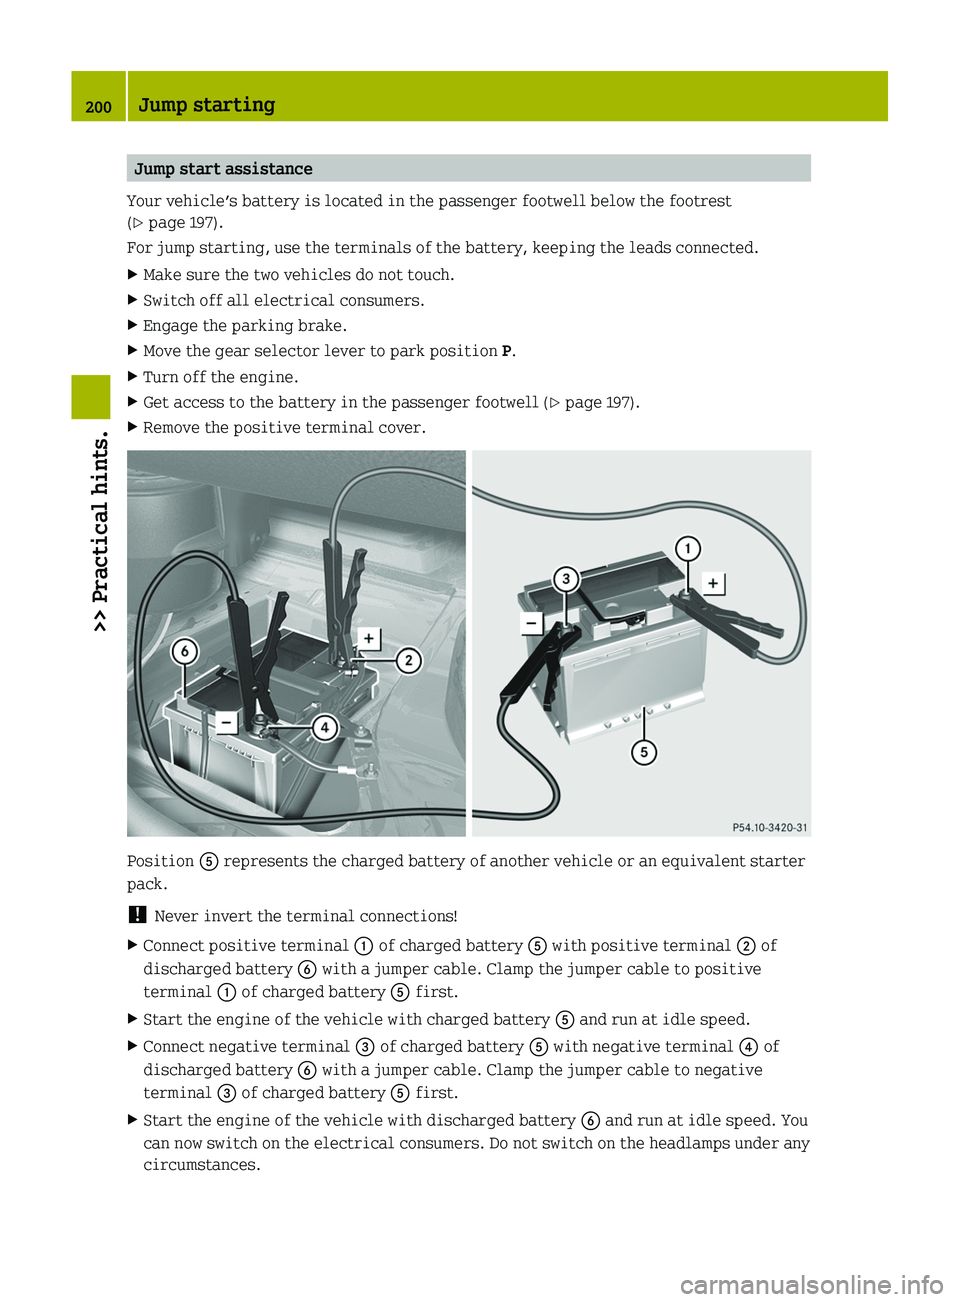 SMART FORTWO COUPE 2011  Owners Manual Jump start assistance
Your vehicle’s battery is located in the passenger footwell below the footrest
(Y page 197).
For jump starting, use the terminals of the battery, keeping the leads connected.
X